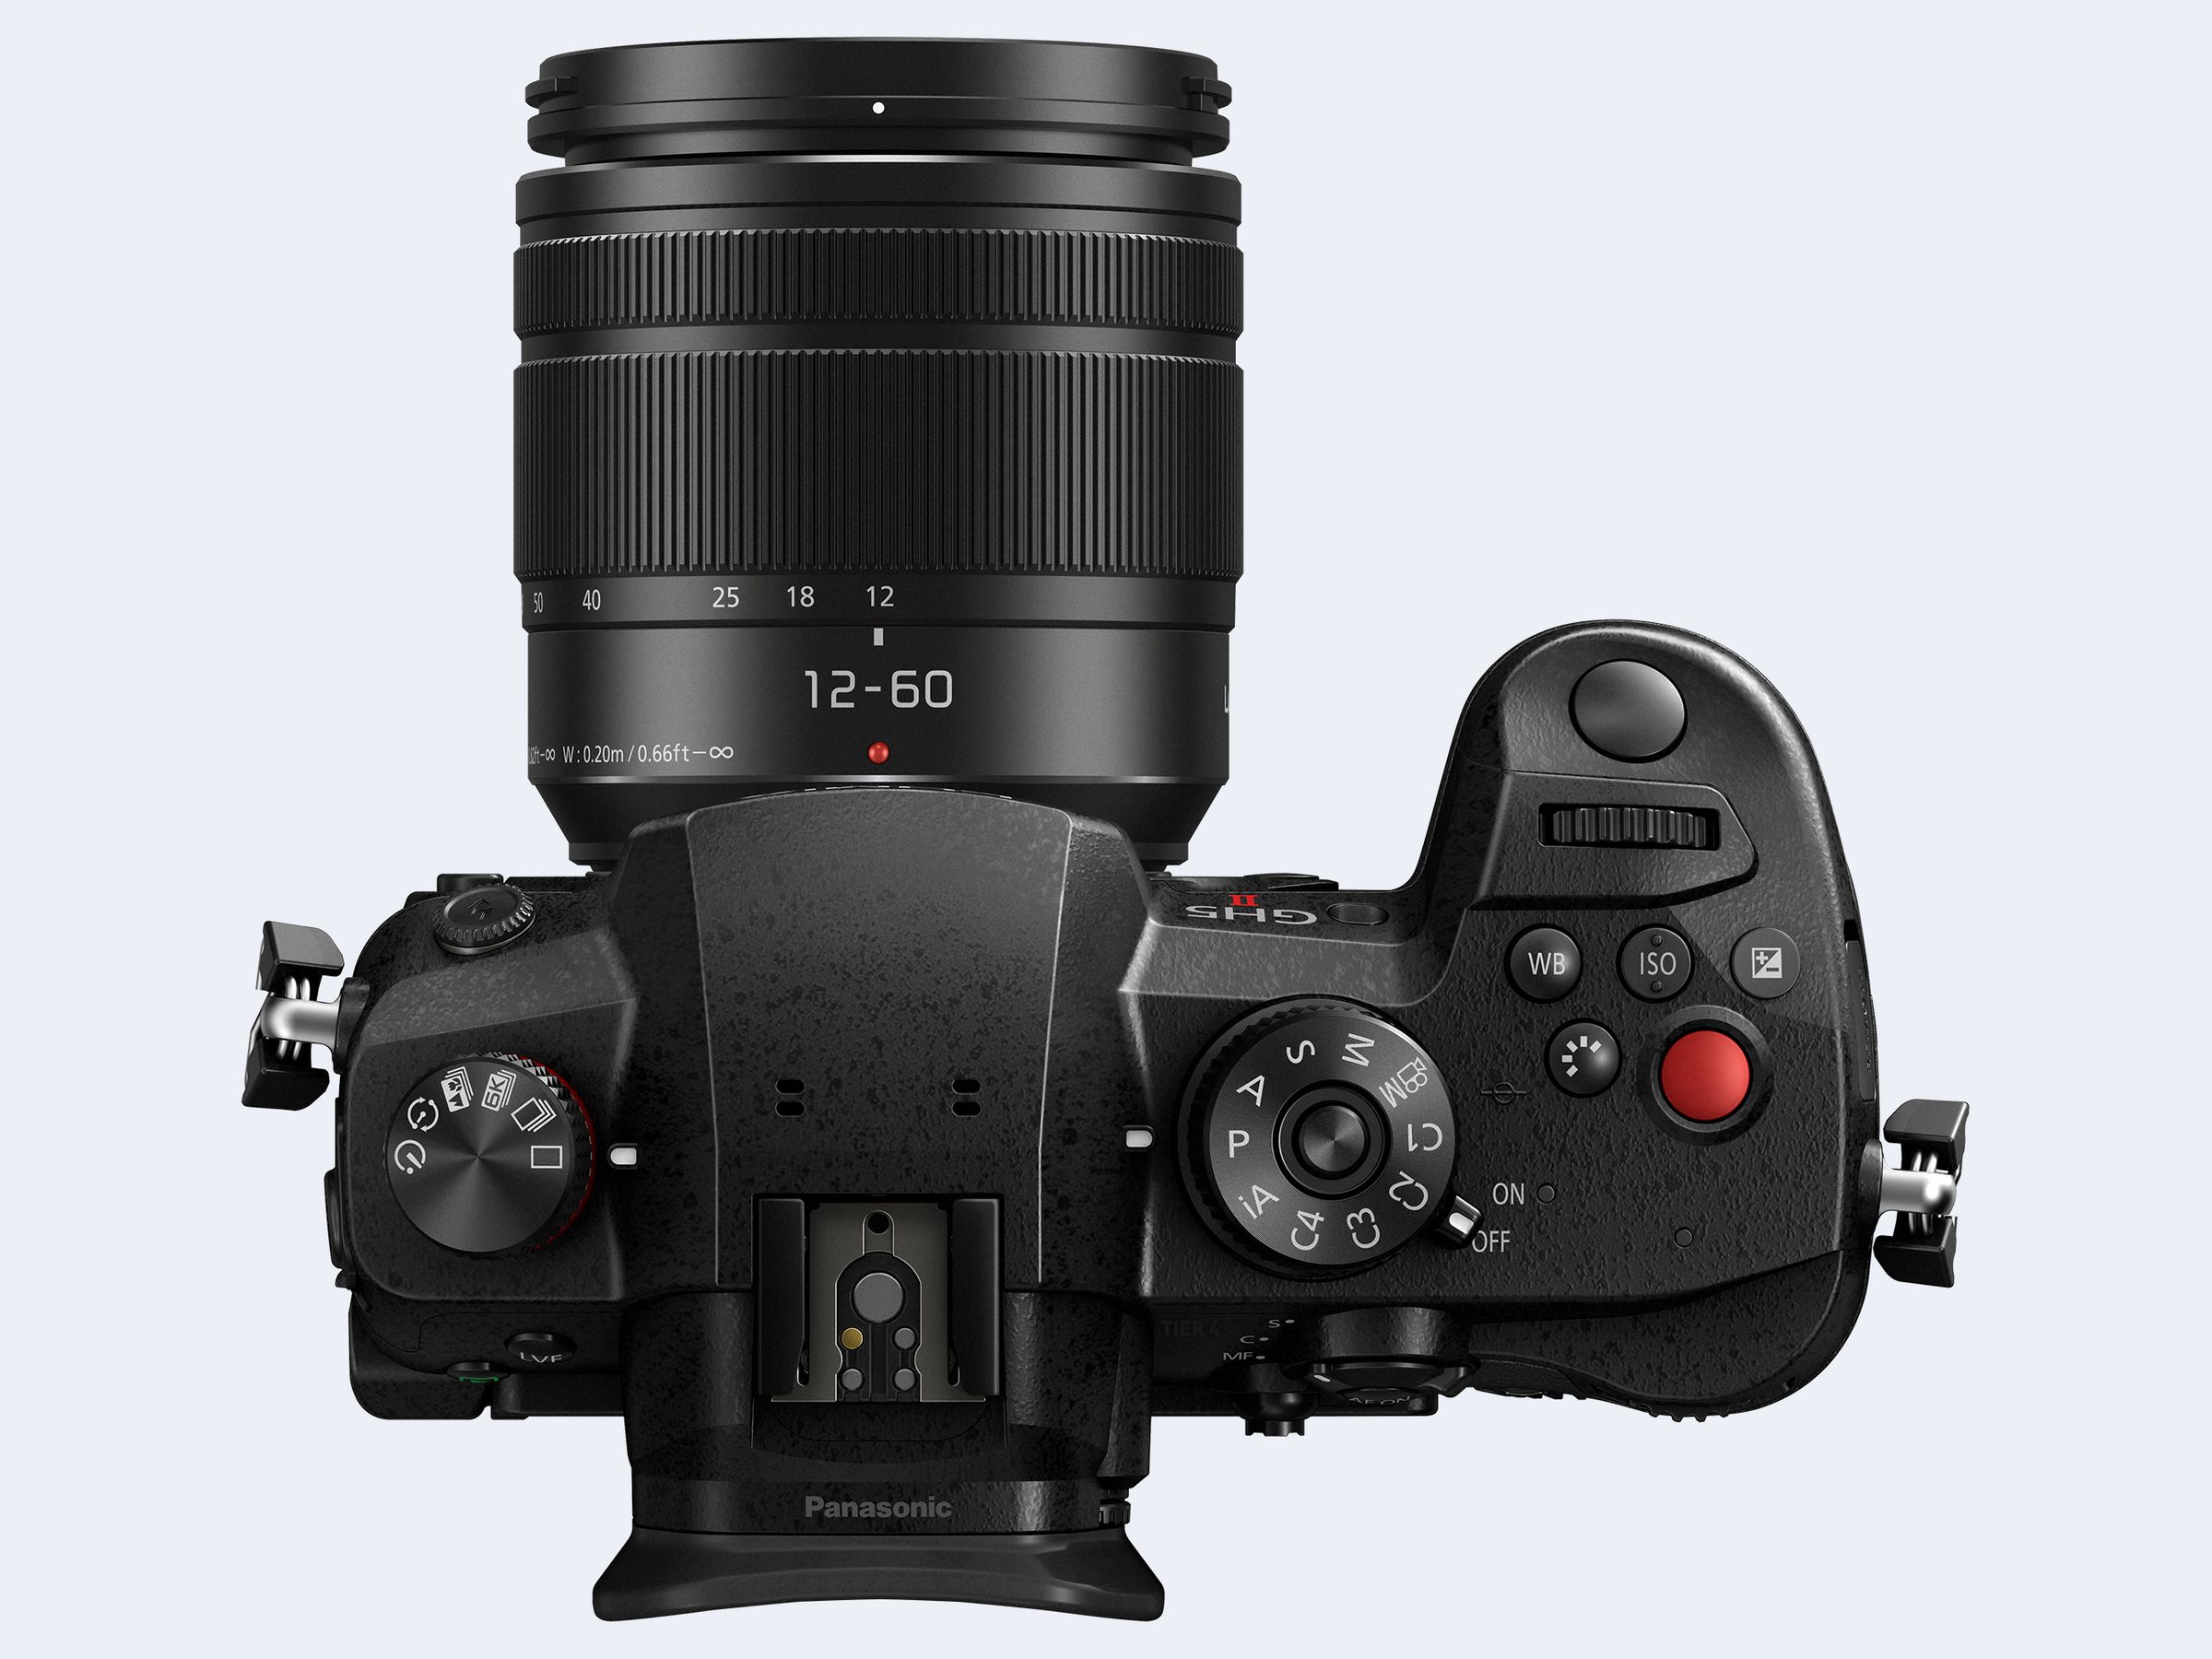 There’s also a kit that comes with a 12-60mm f/2.8-4 image-stabilized lens for $2,300.